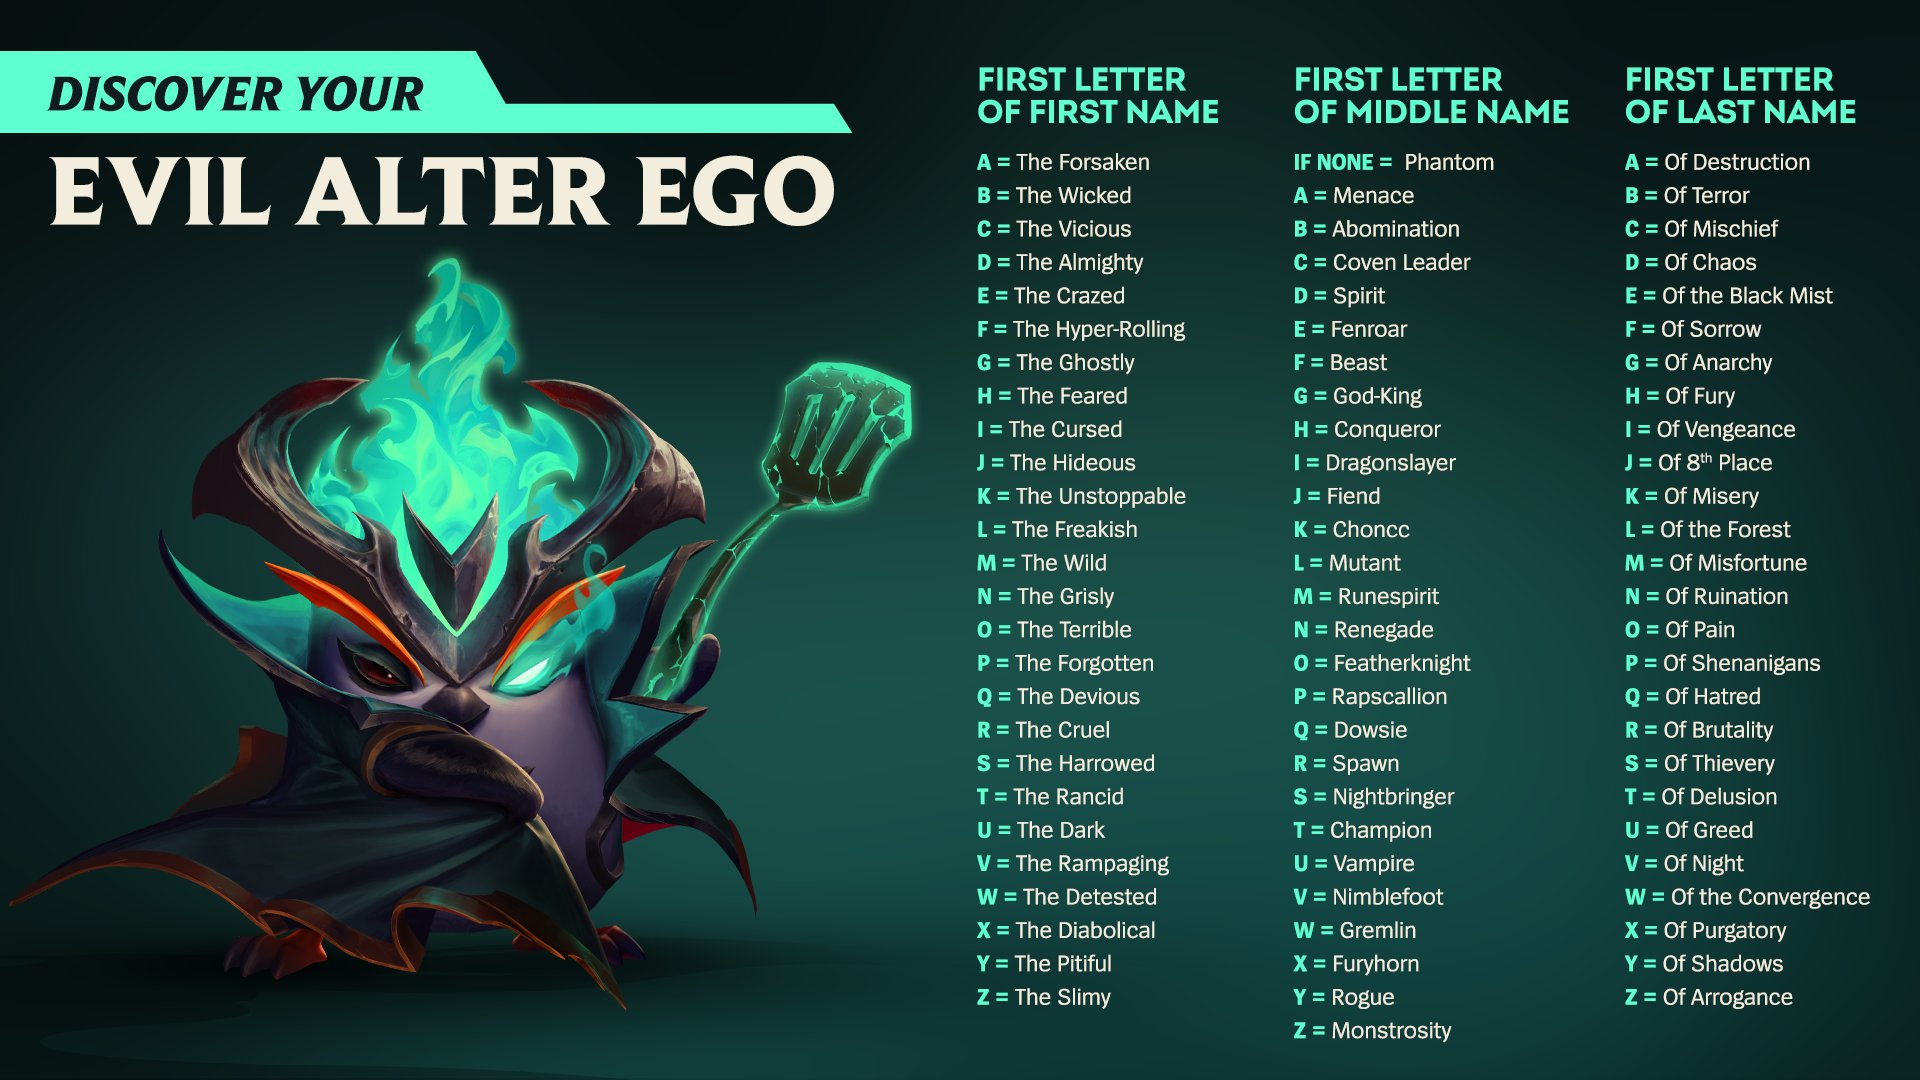 League Of Legends Uk Ie Nordics Discover Your Evil Alter Ego Let Us Know Your New Name Below